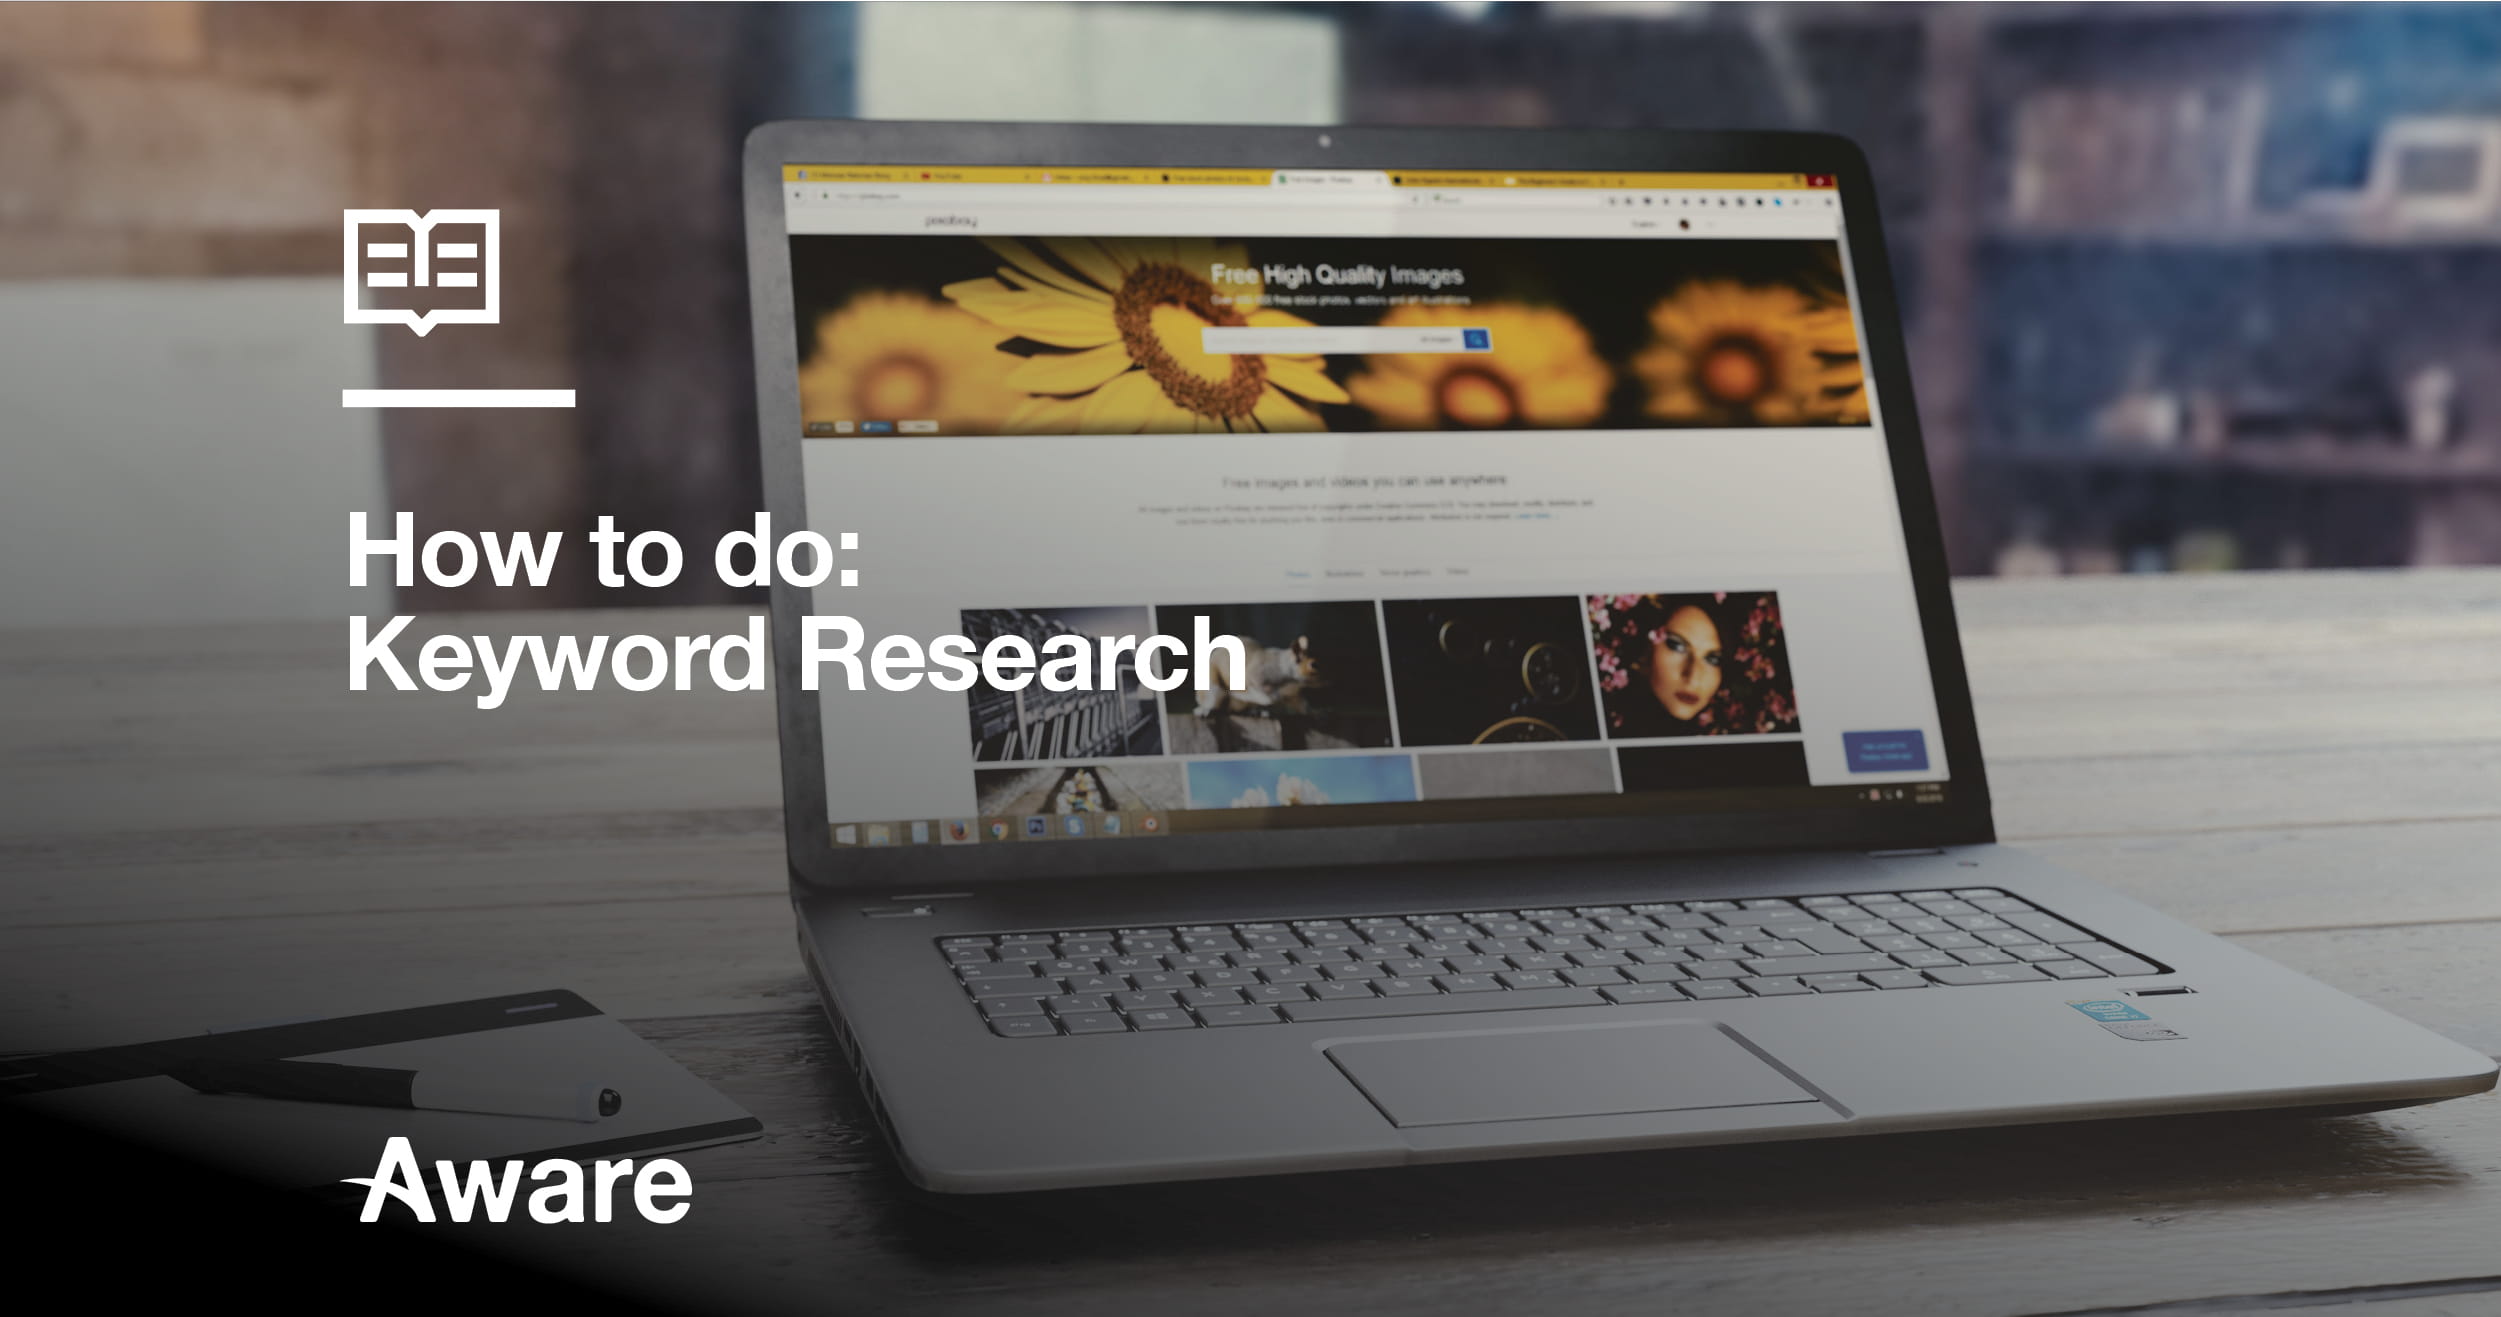 How To Do: Keyword Research